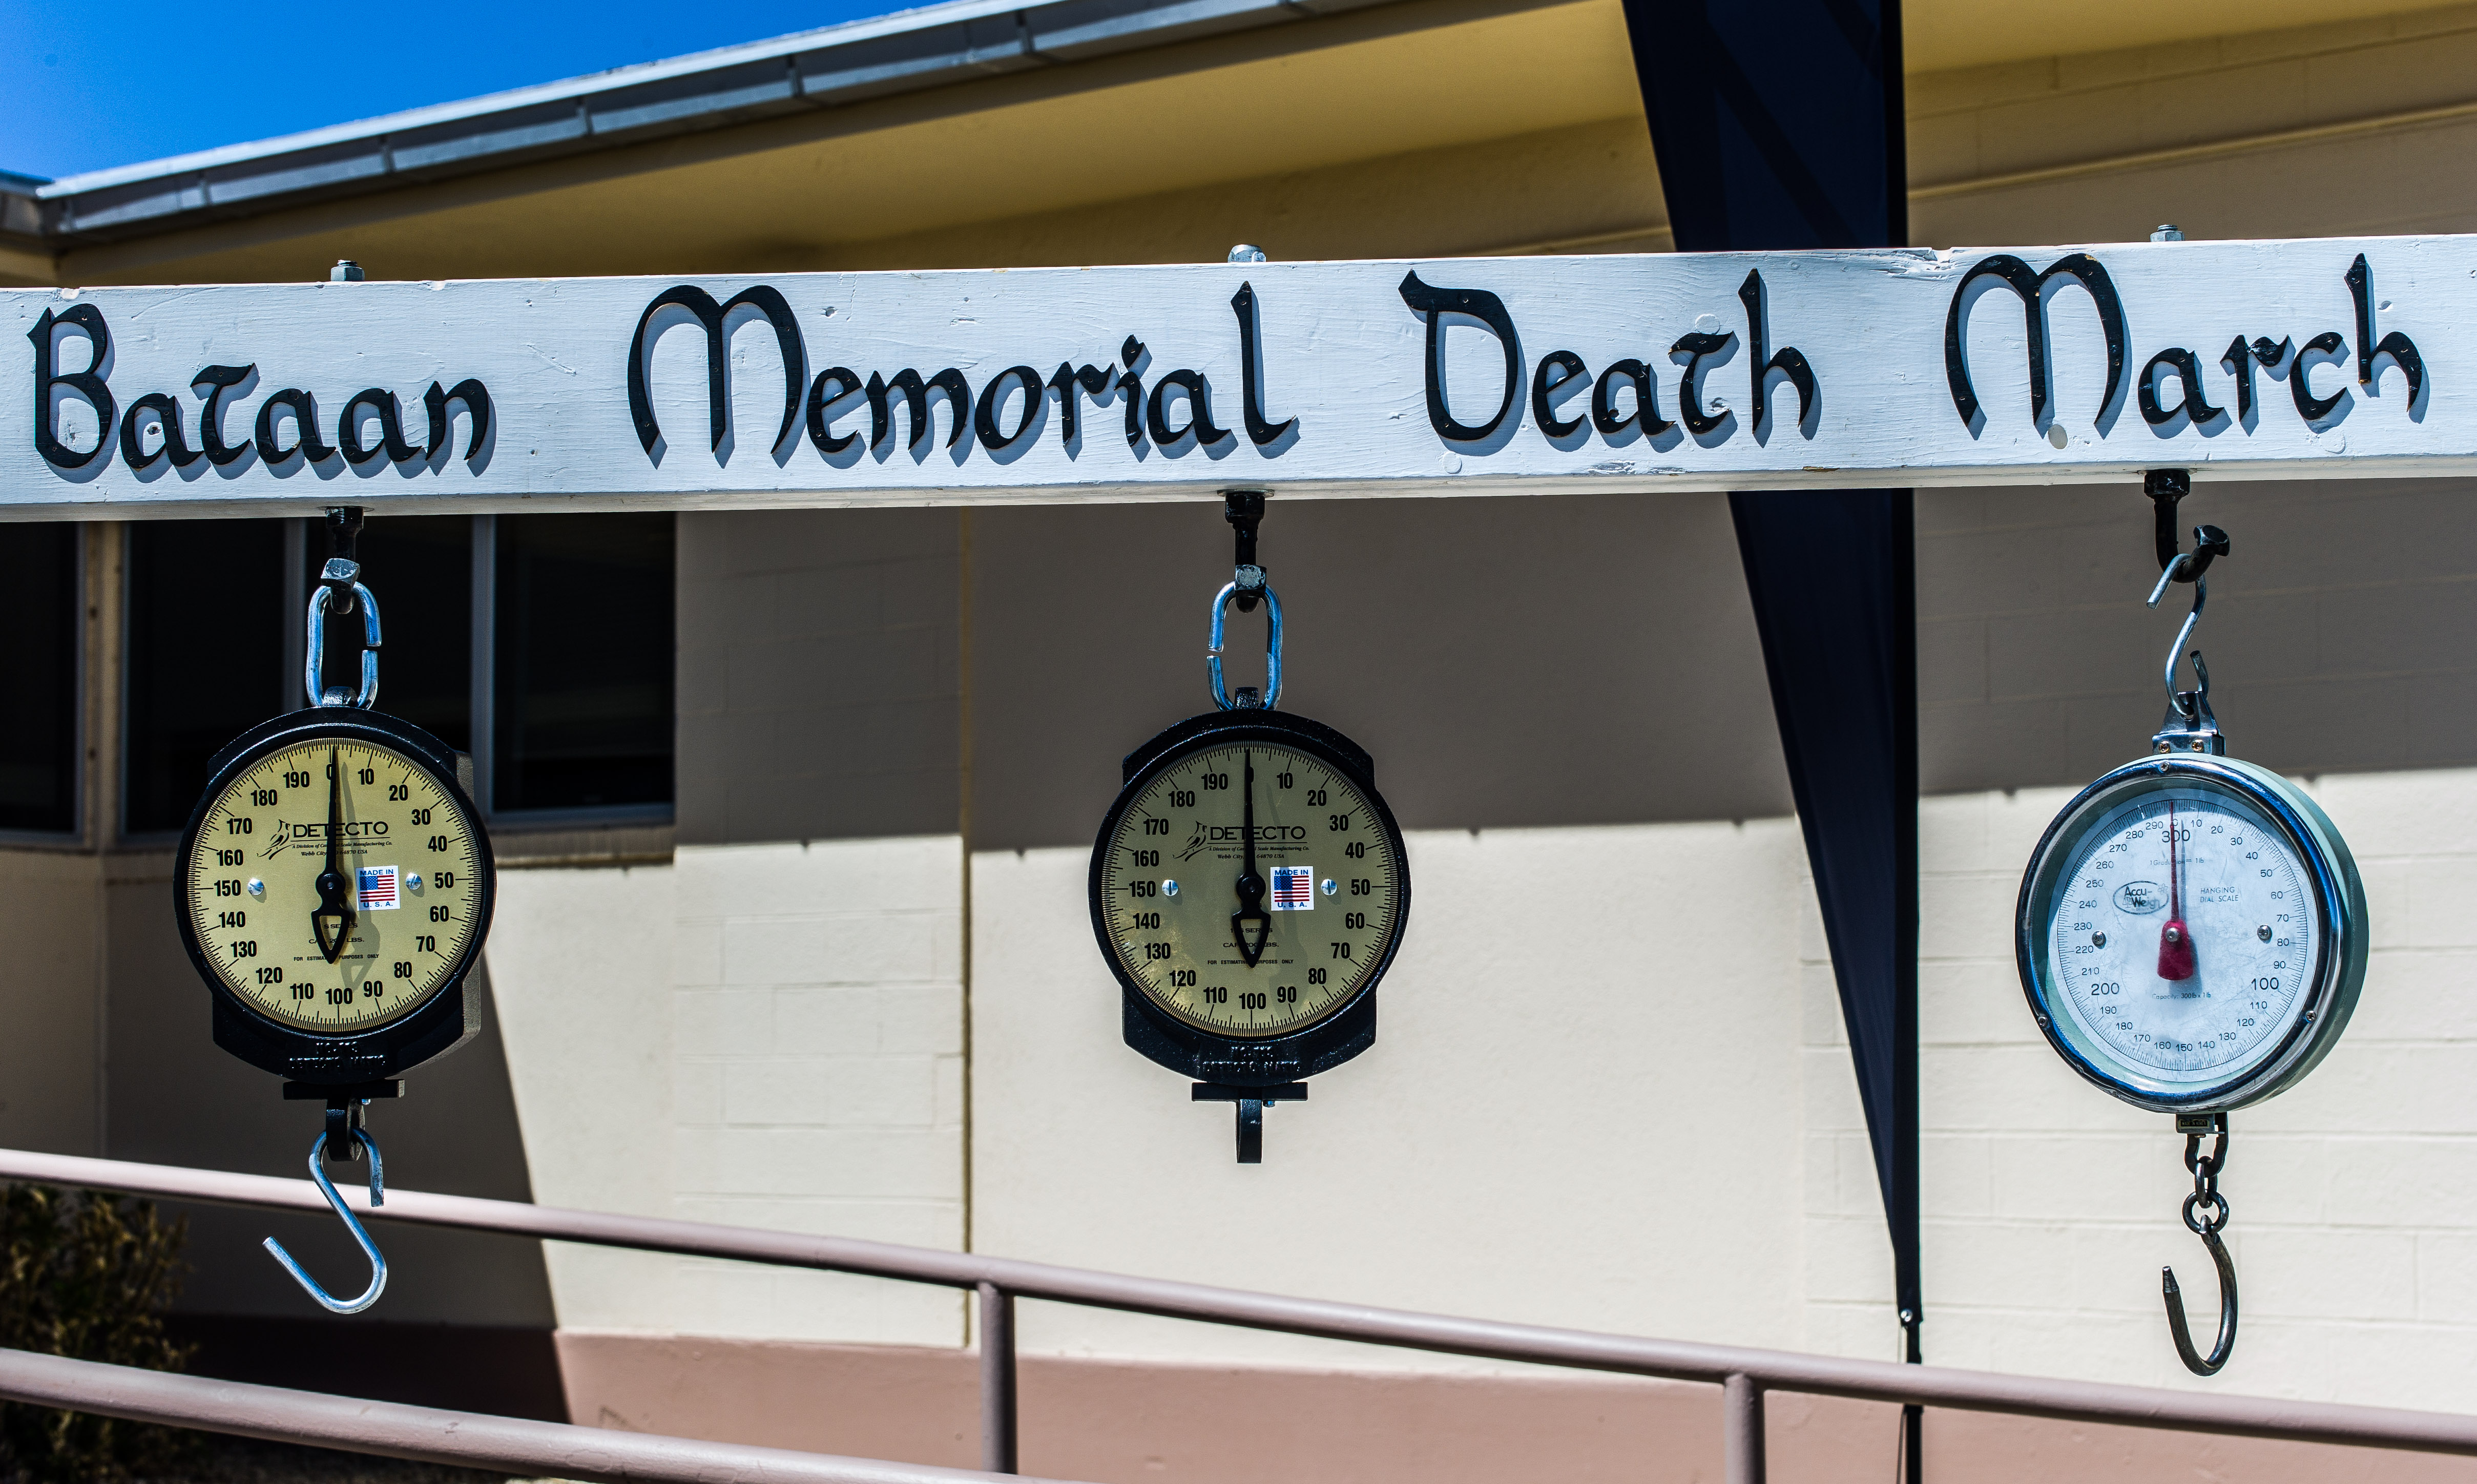 20120327-A-RE761-001: The official scales of the 23rd Annual Bataan Memorial Death March are displayed March 23 outside of the Community Center located on White Sands Missile Range in New Mexico. For the military heavy team division, each team member must complete the 26.2-mile course in uniform while wearing a 35lbs rucksack. (Photo by Staff Sgt. Michael J. Dator, 85th Civil Affairs Brigade Public Affairs)